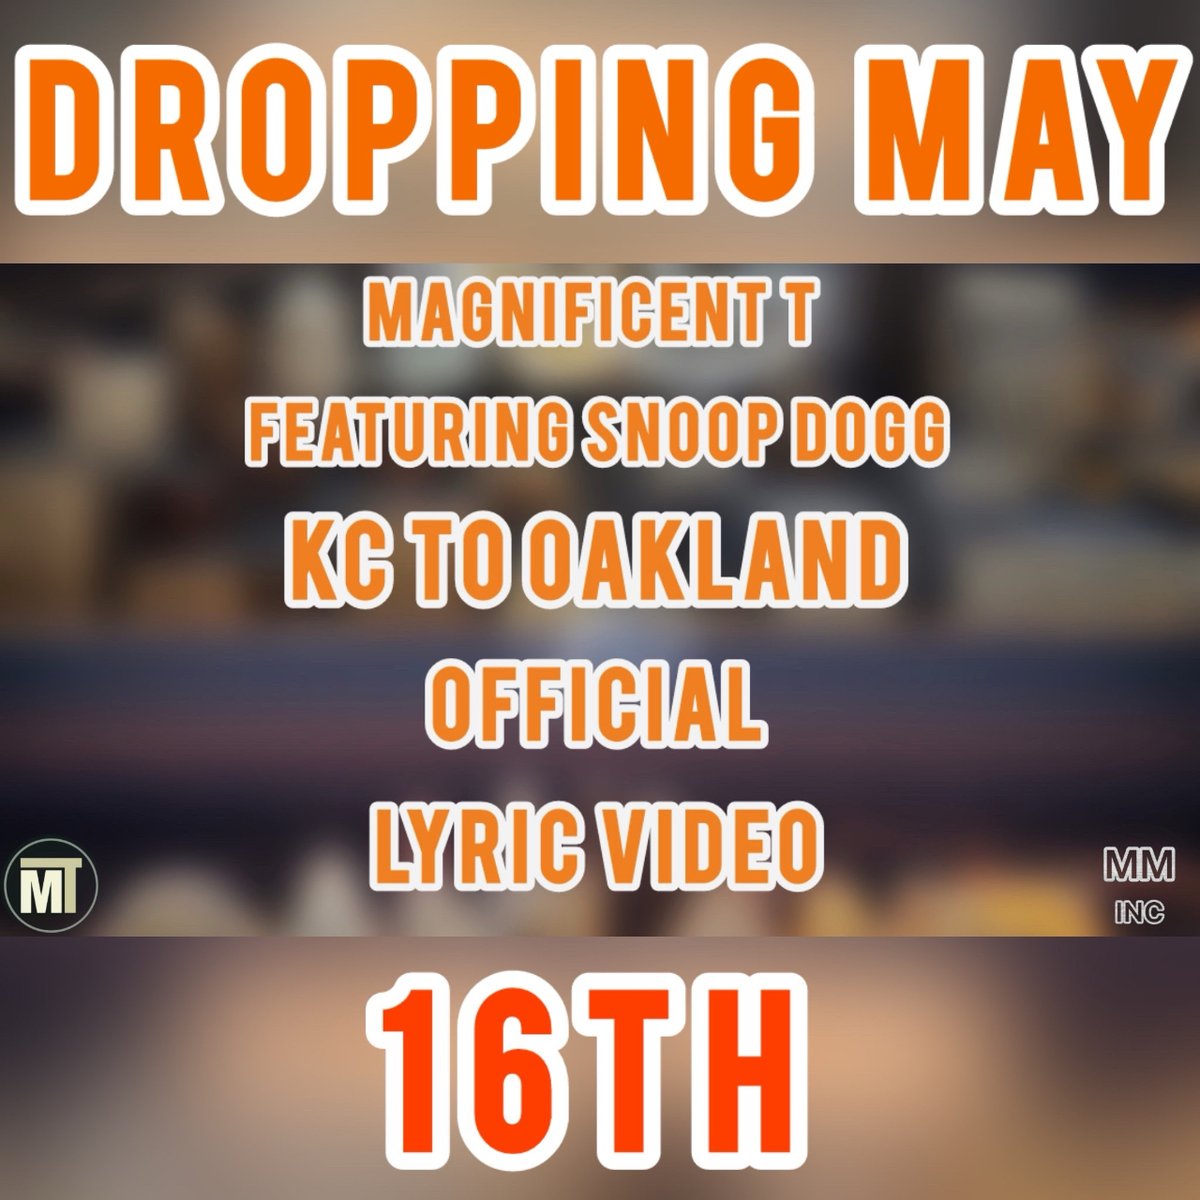 KC to Oakland Lyric Video Is Dropping Next Week On The 16th On My YouTube ‼️ I Put A Lot Of Work Into It So I’m Really Excited For It Fam 🤘🏼💯 #MTGang🎙️#KCToOakland #SnoopDogg #MidWestHipHop #WestCoastHipHop #Youtube #NewVideoComingSoon #RapLyricVideo #LyricVideo